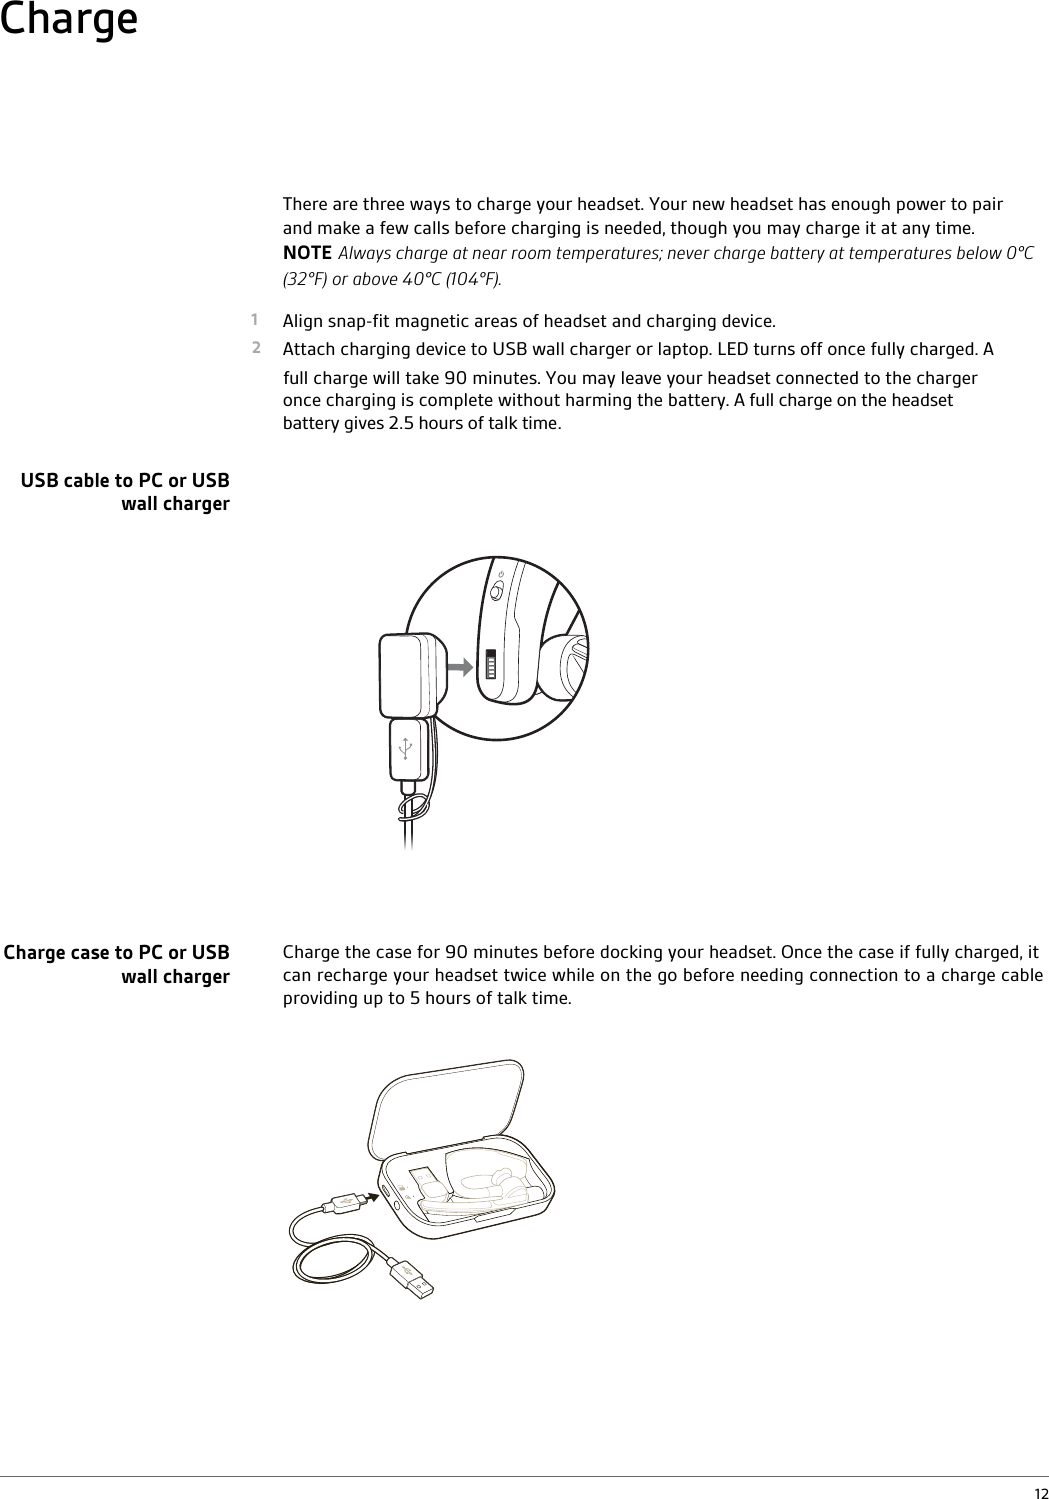 There are three ways to charge your headset. Your new headset has enough power to pair and make a few calls before charging is needed, though you may charge it at any time. NOTE Always charge at near room temperatures; never charge battery at temperatures below 0°C (32°F) or above 40°C (104°F).1 Align snap-fit magnetic areas of headset and charging device.2 Attach charging device to USB wall charger or laptop. LED turns off once fully charged. A            charge will take 90 minutes. You may leave your headset connected to the charger once charging is complete without harming the battery. A full charge on the headset battery gives 2.5 hours of talk time.  Charge the case for 90 minutes before docking your headset. Once the case if fully charged, it can recharge your headset twice while on the go before needing connection to a charge cable providing up to 5 hours of talk time.ChargeUSB cable to PC or USB wall chargerCharge case to PC or USB wall charger12full